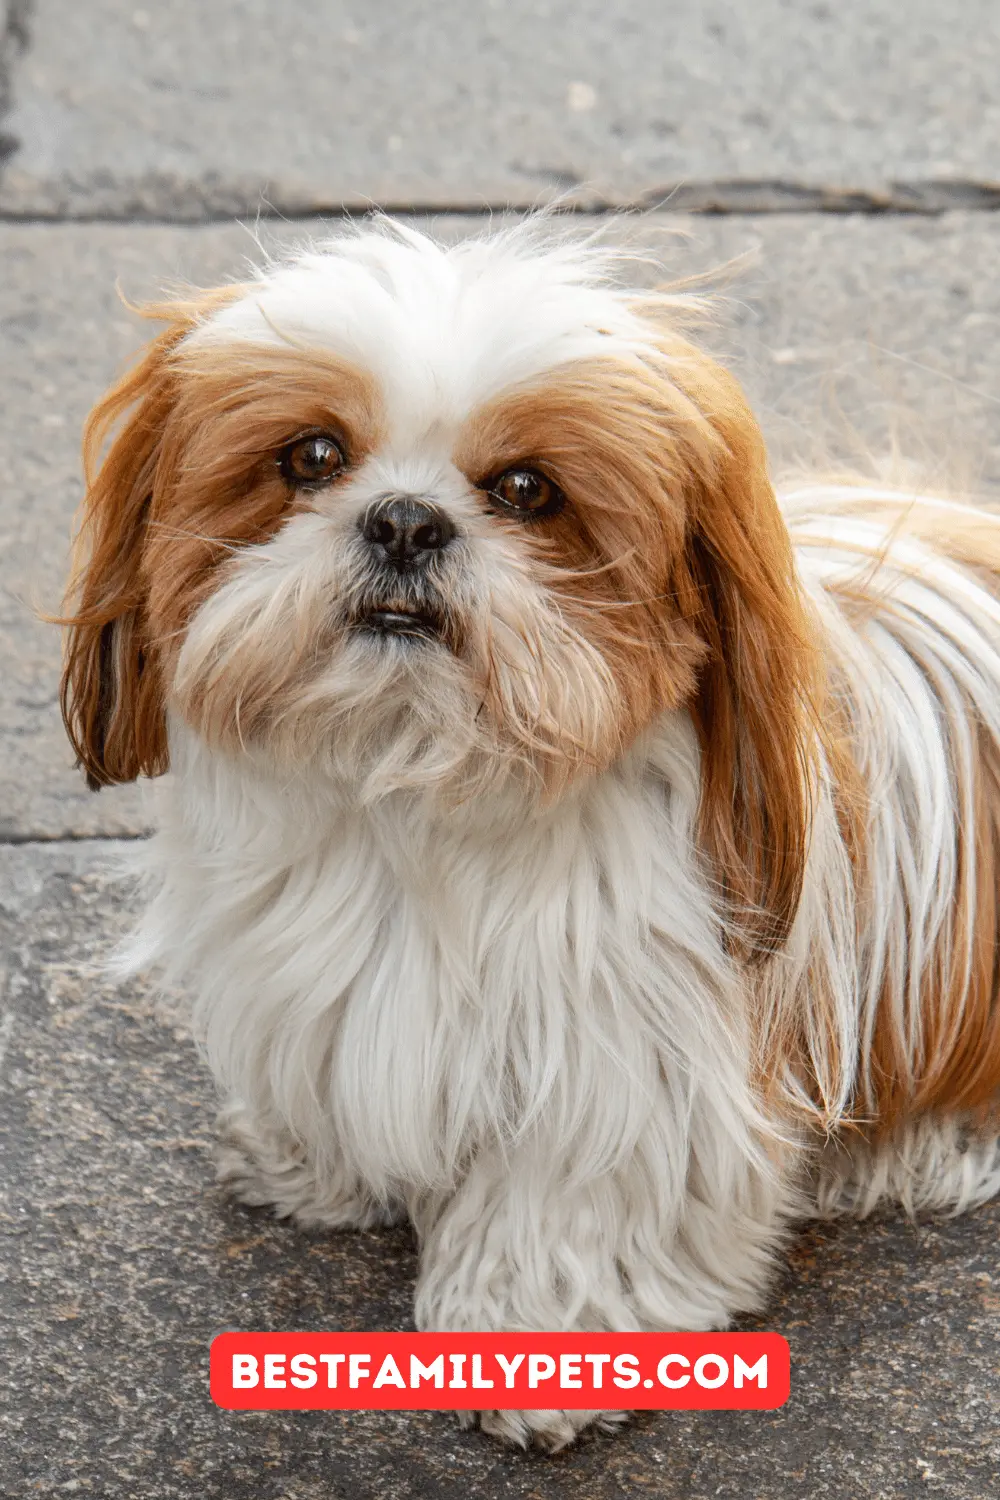 Dog Clippers Which Is the Best for Shih Tzu